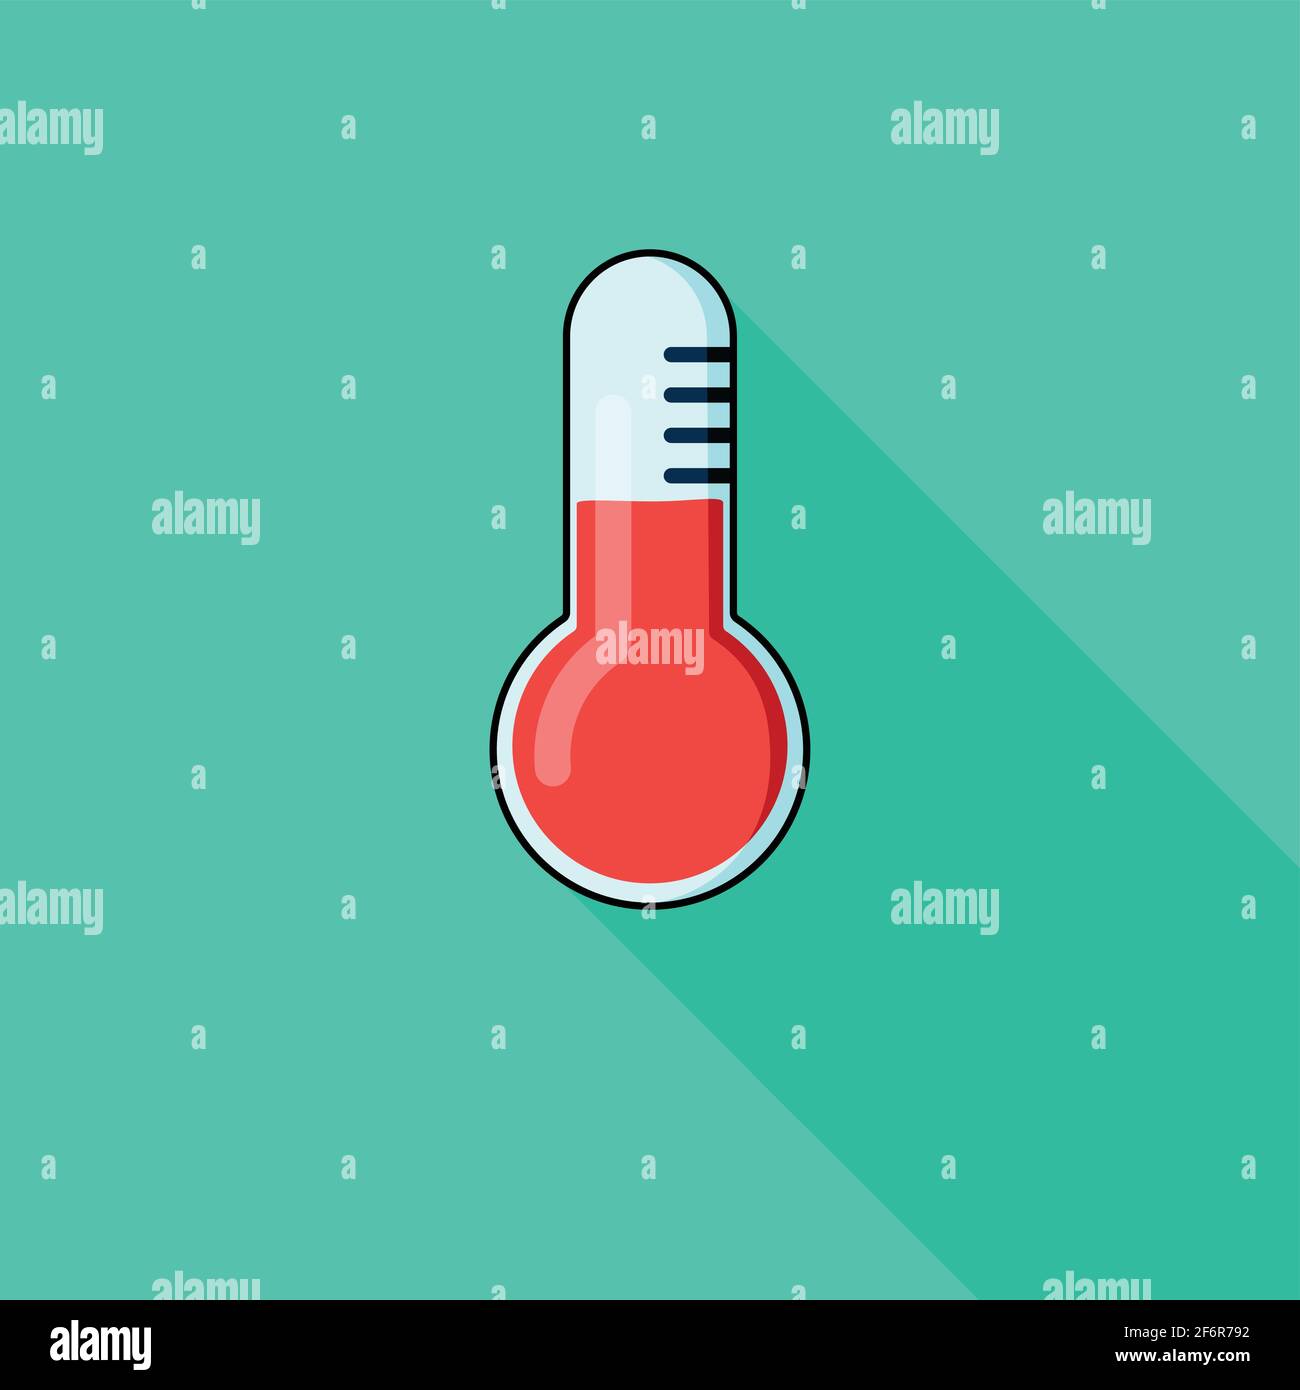 Modern icon thermometer, background green and flat style, urgency, long shadow Stock Vector